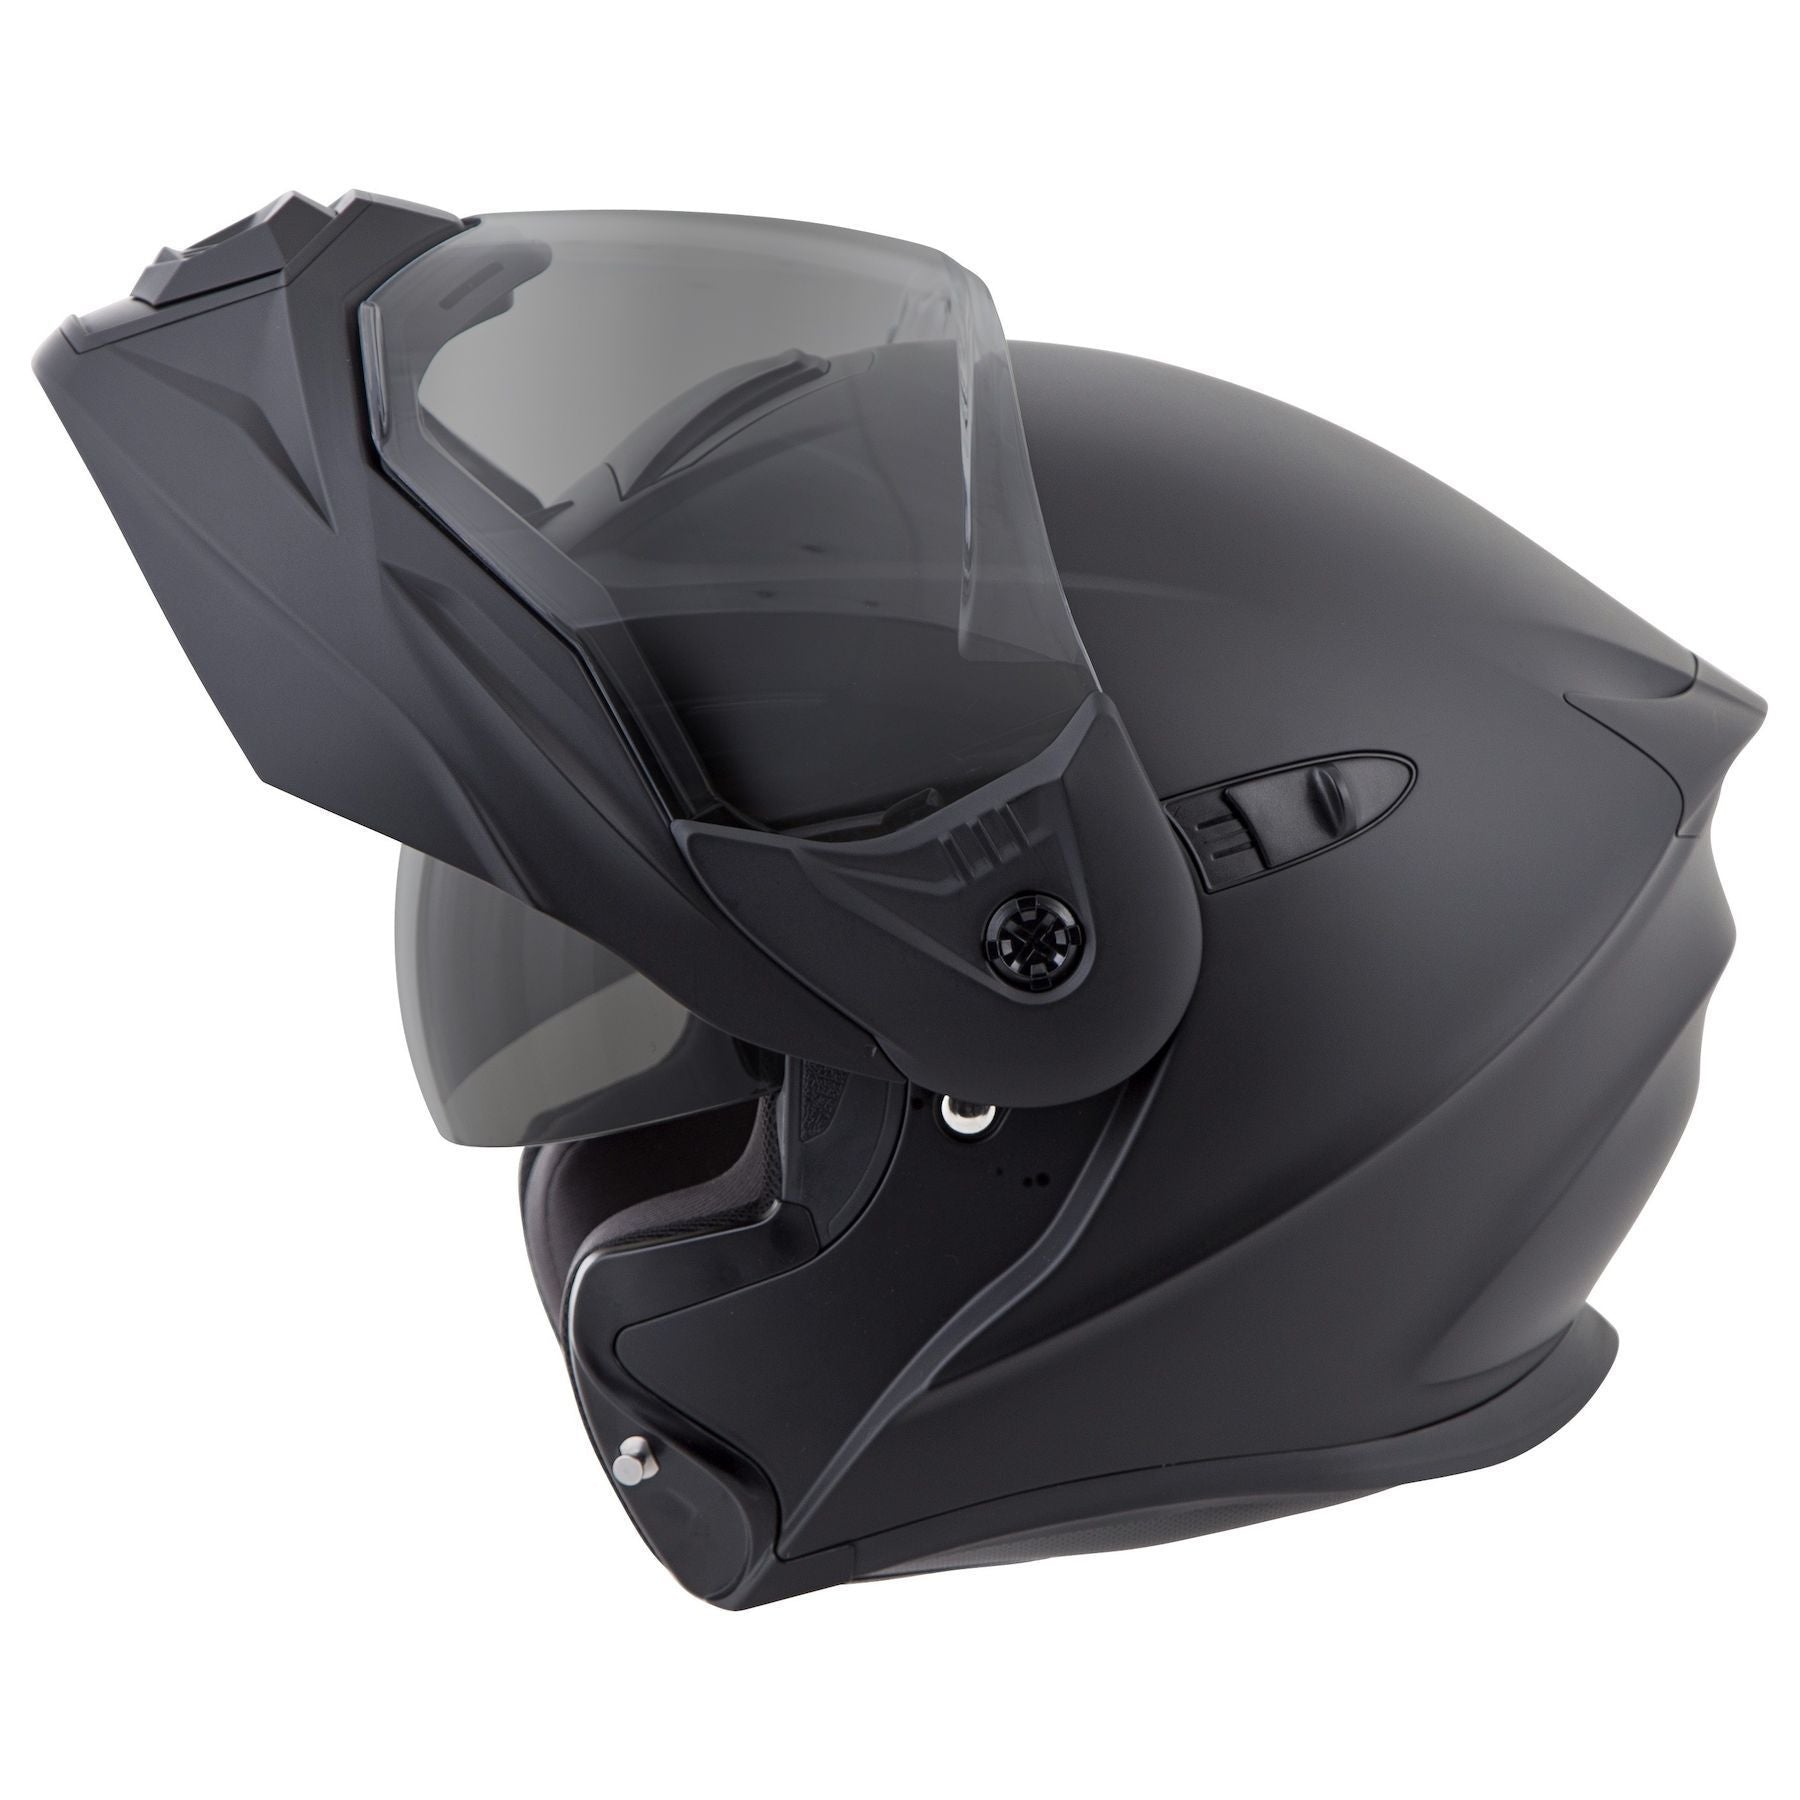 Scorpion EXO-AT950 Matte Black Snow Helmet with Electric Shield